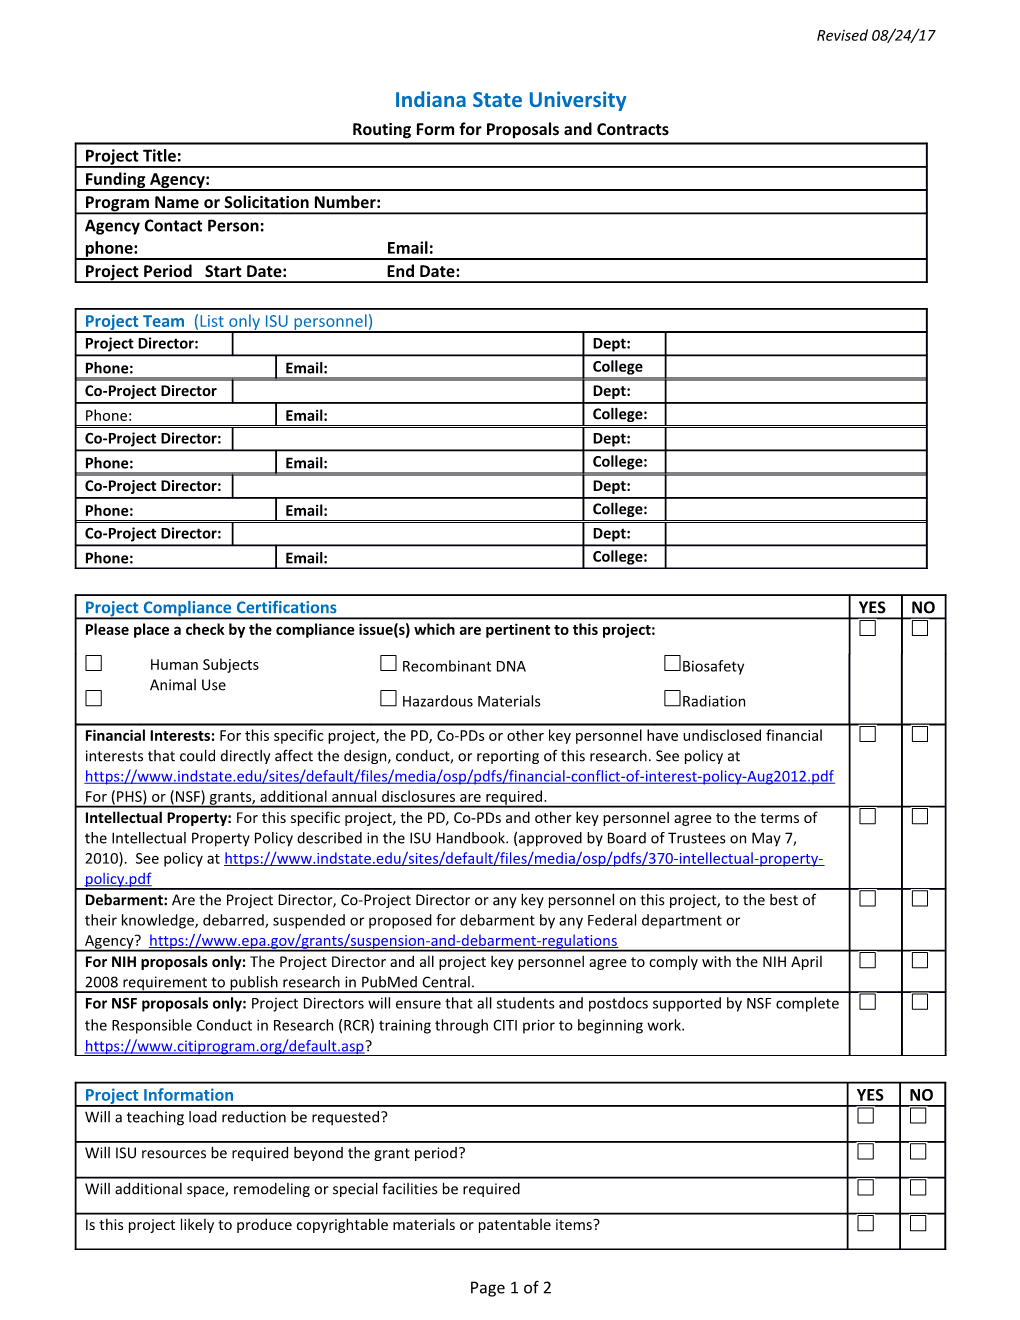 Routing Form for Proposals and Contracts